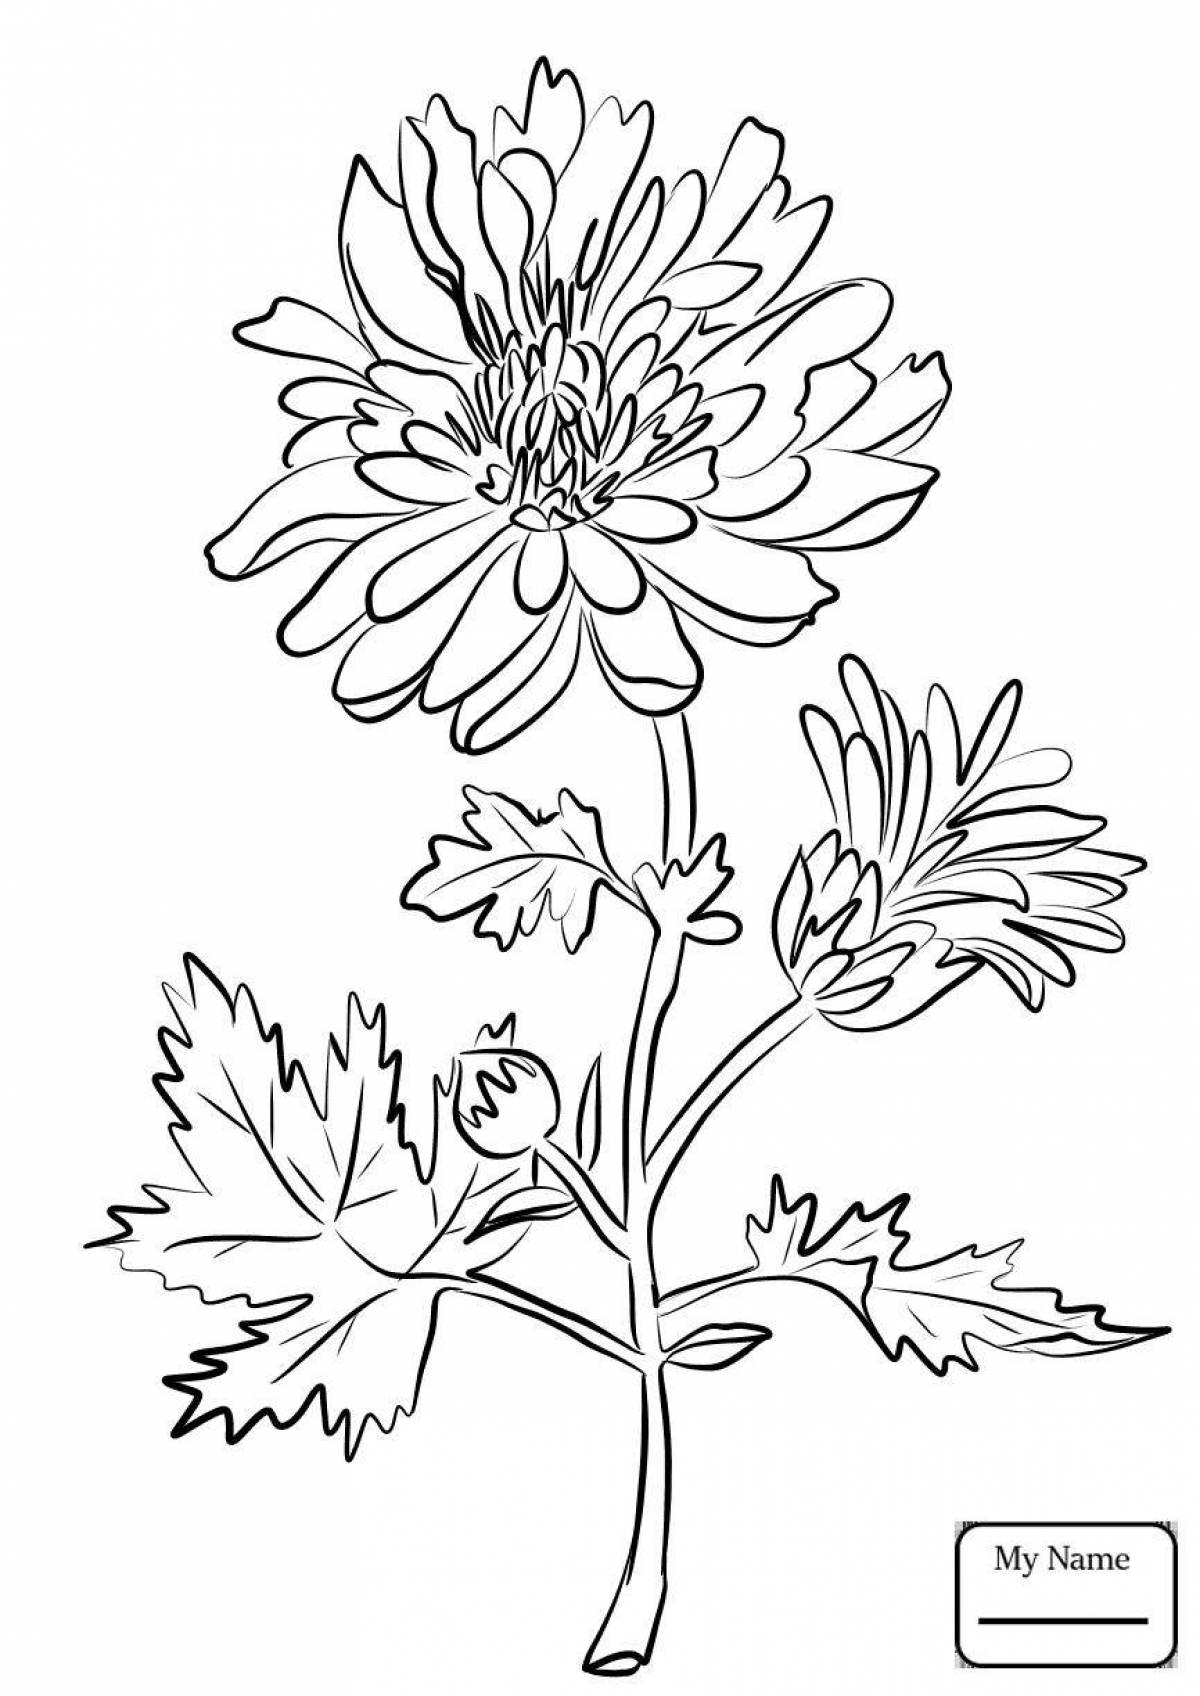 Bright aster coloring book for children